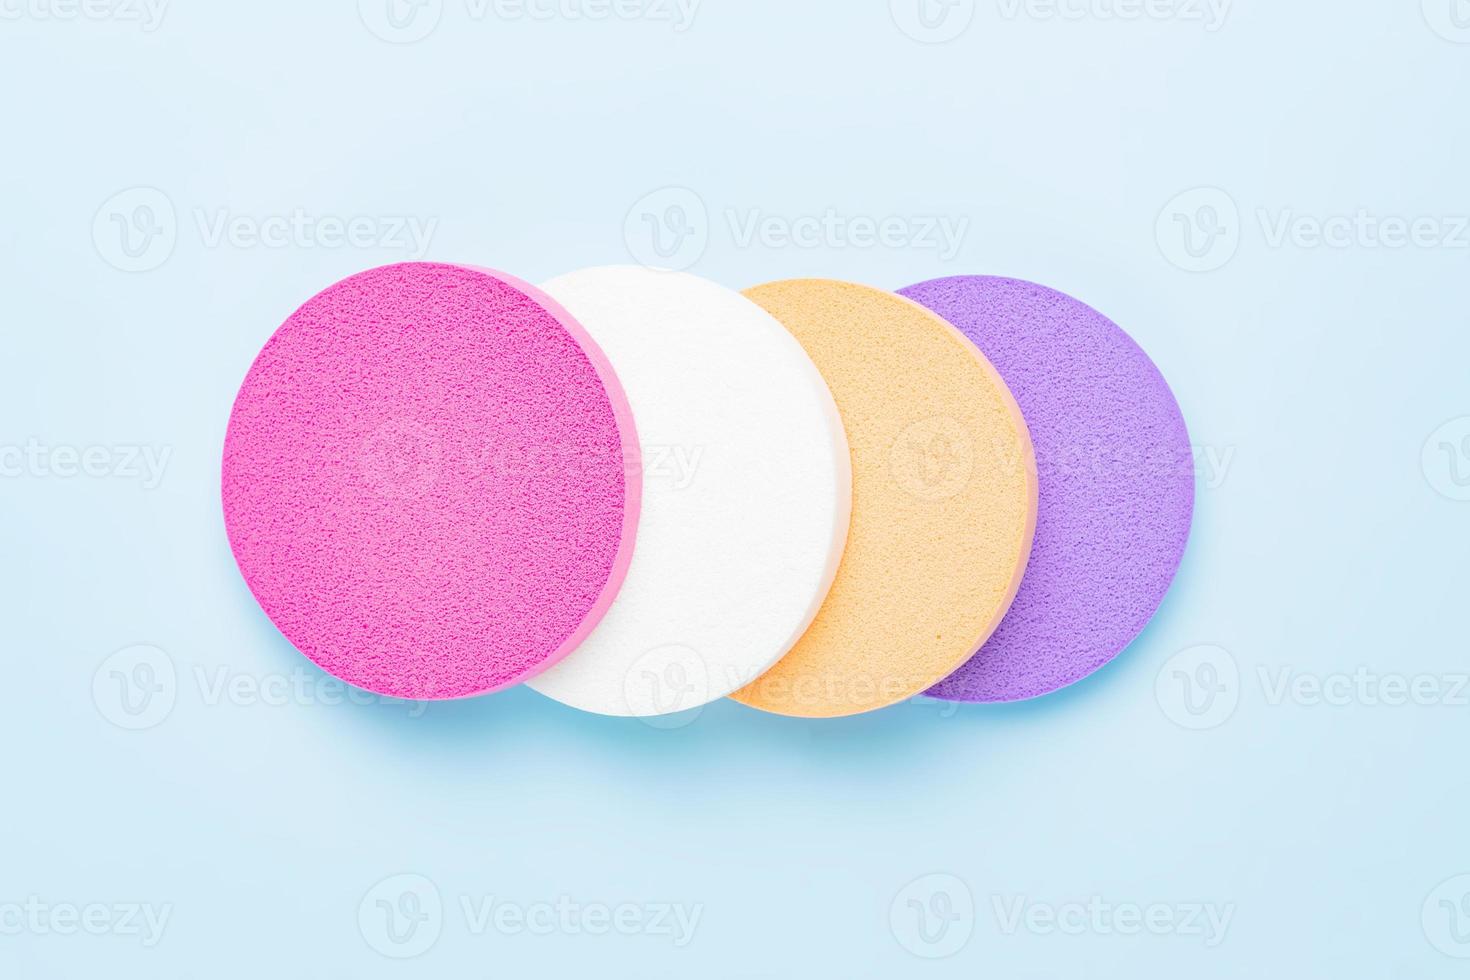 Makeup Blending sponge set for all kinds of cosmetics, foundation, BB cream, powder, concealer. Foundation beauty blender Sponge flawless for Liquid and Creams photo